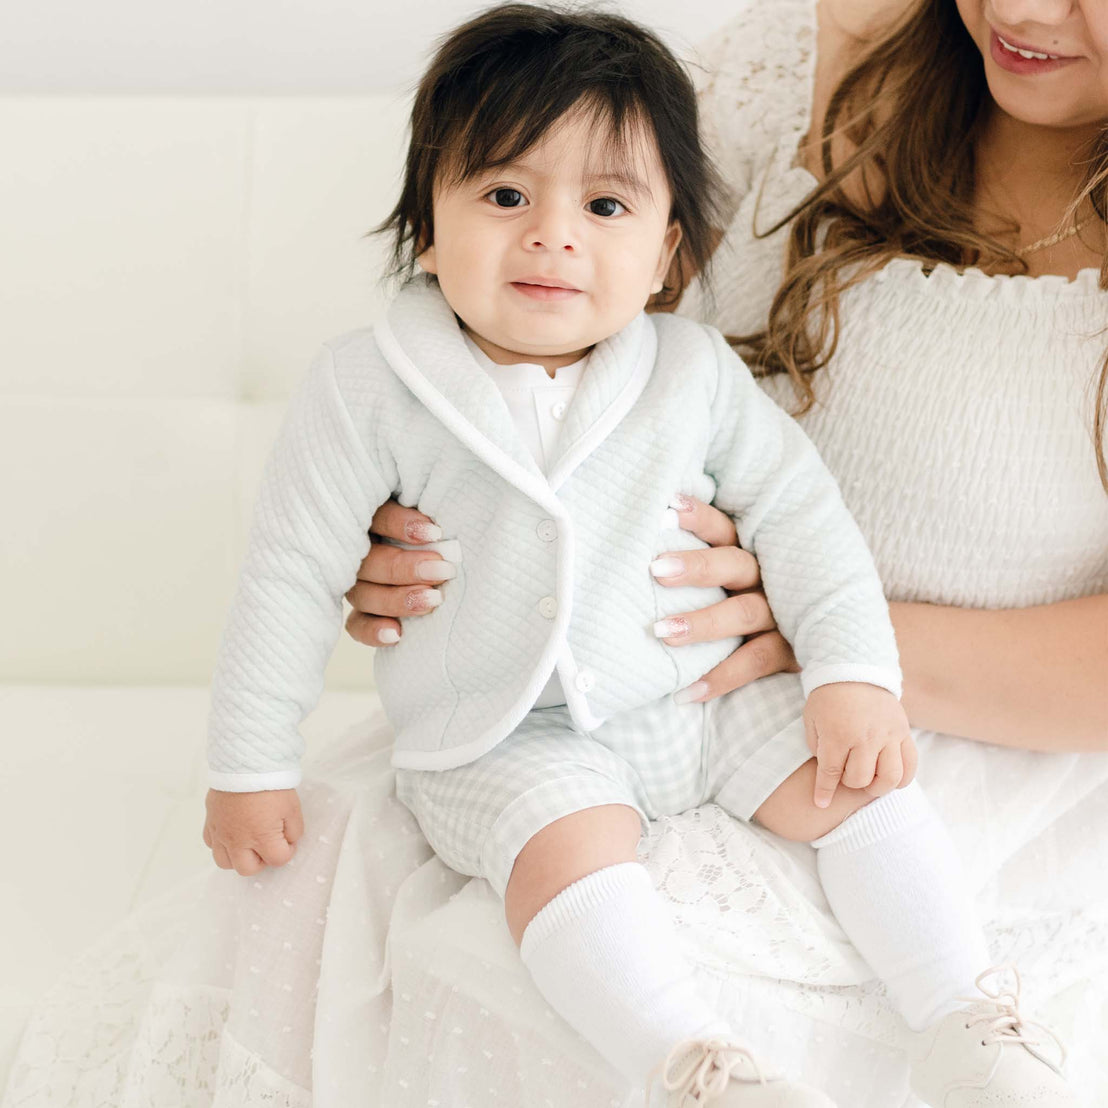 A baby with thick hair, dressed in an Ian Cloud Shorts Set and a designer white cardigan, sits on a woman's lap, both smiling in a brightly lit room.